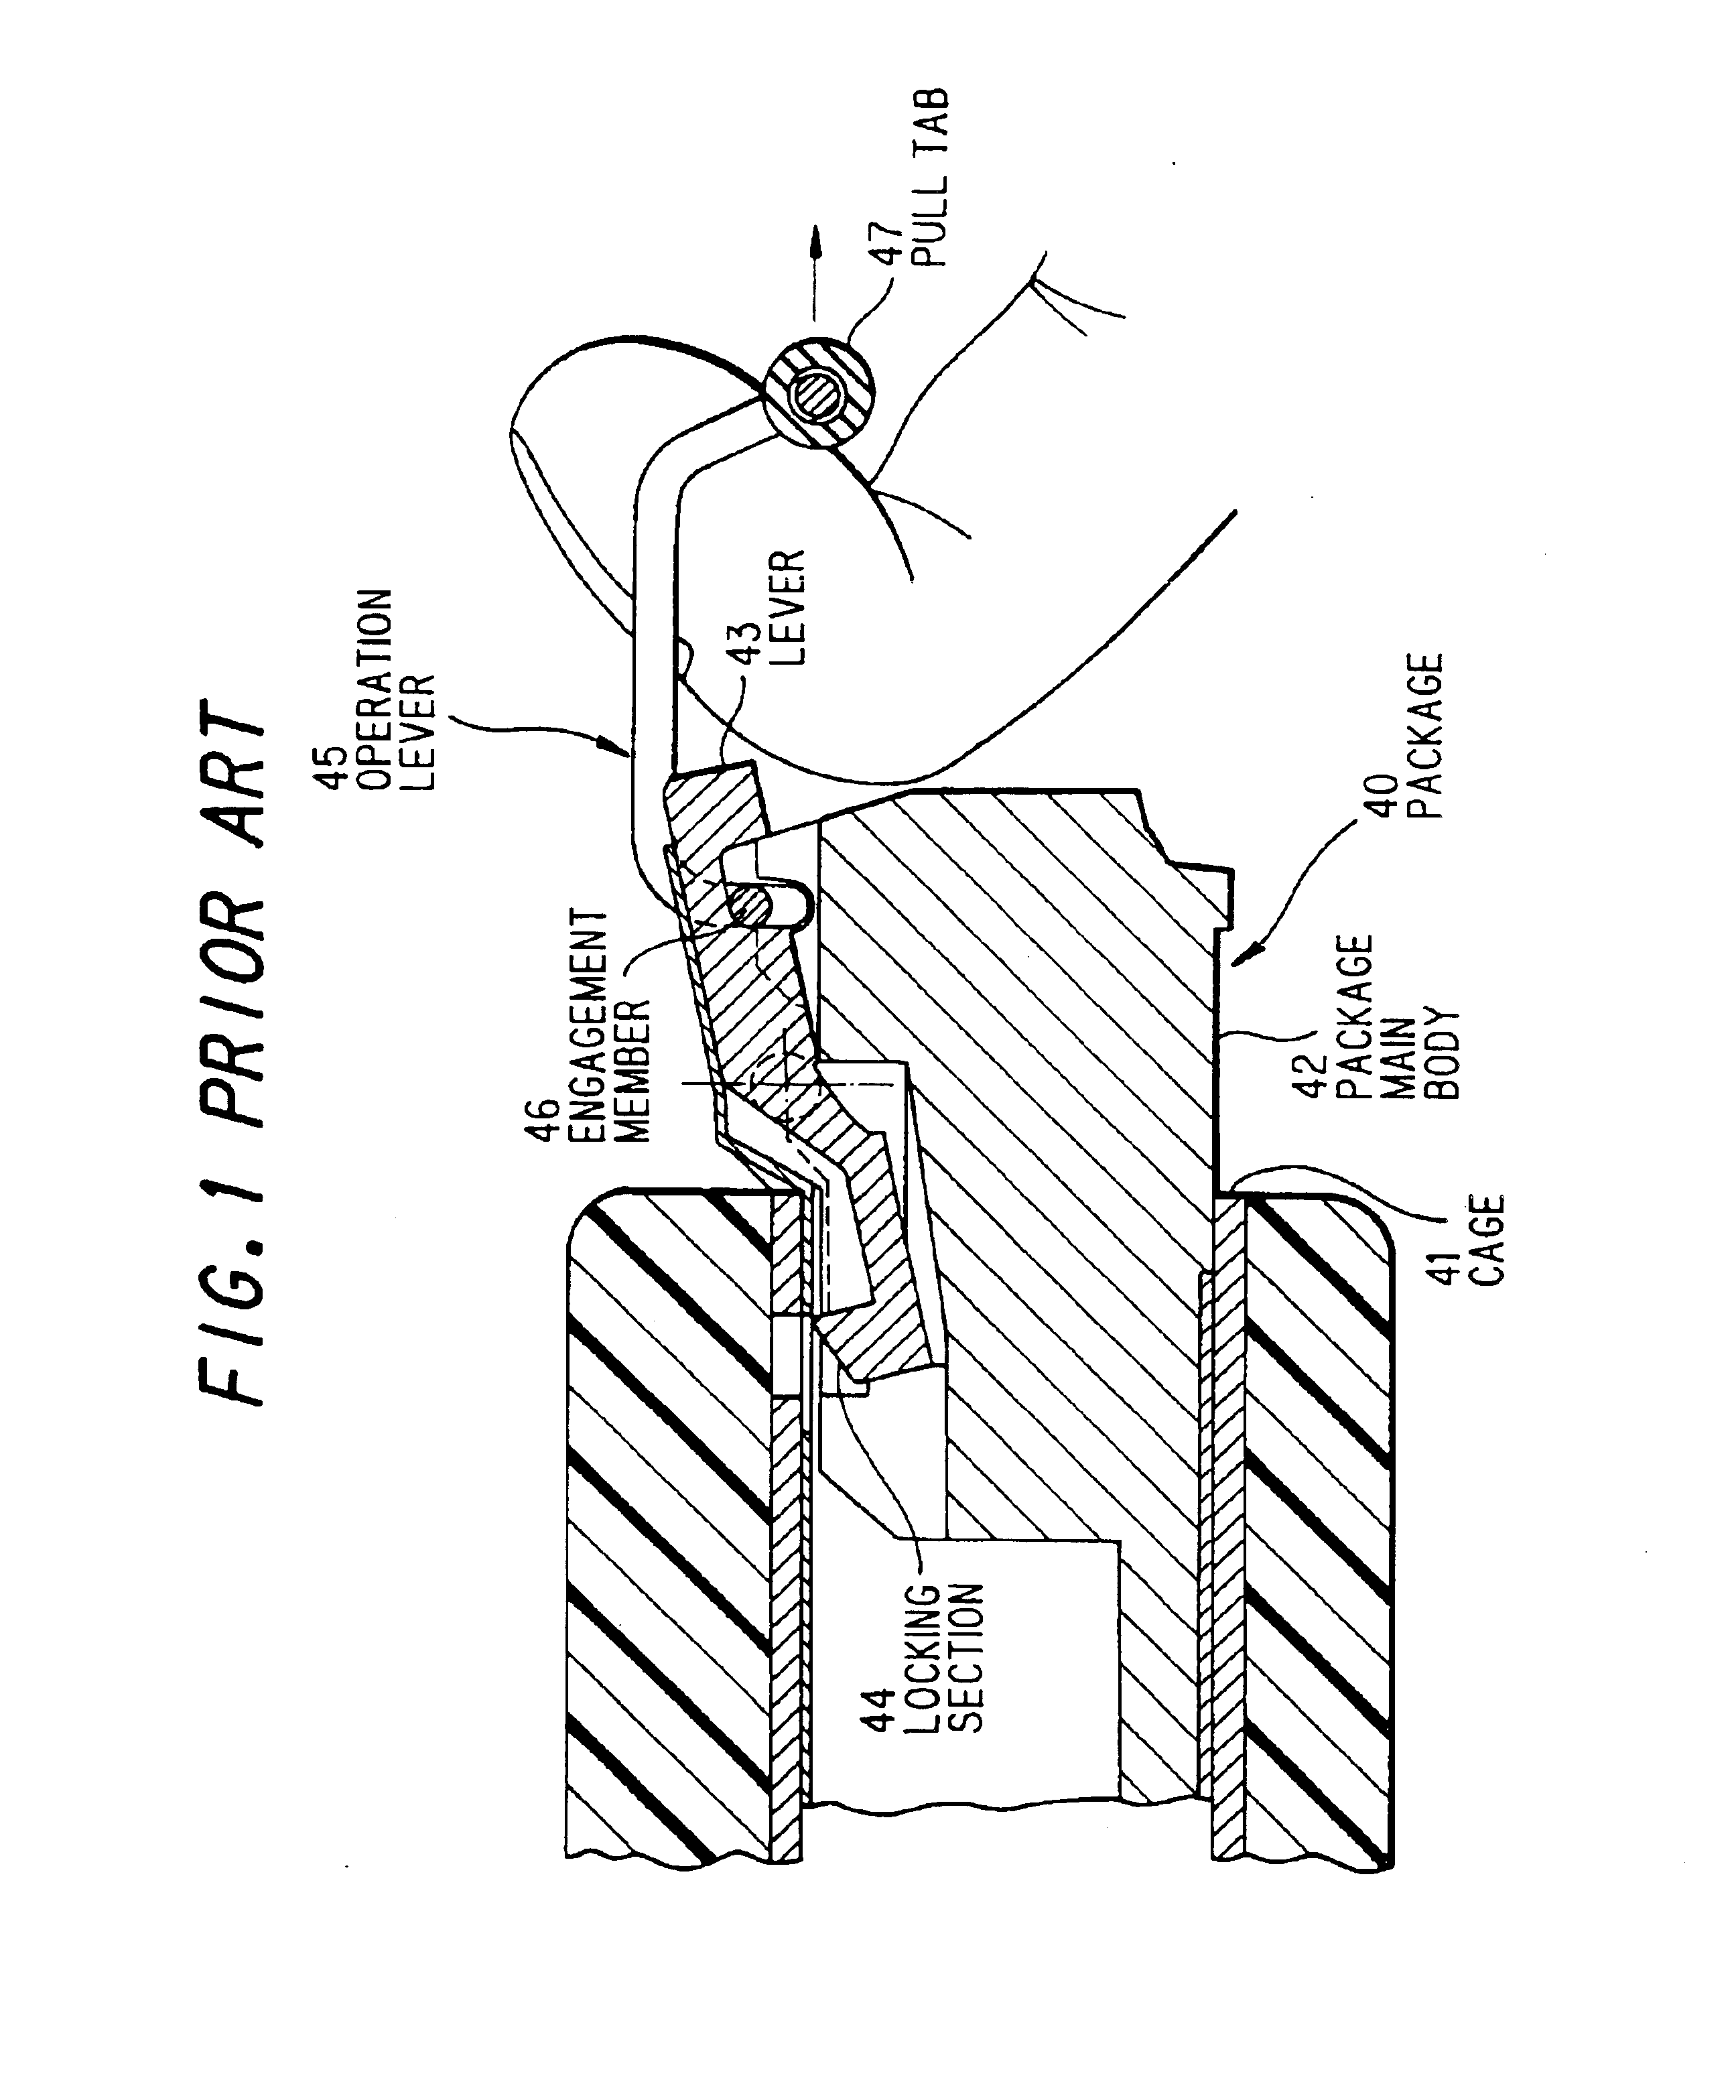 Package with locking mechanism